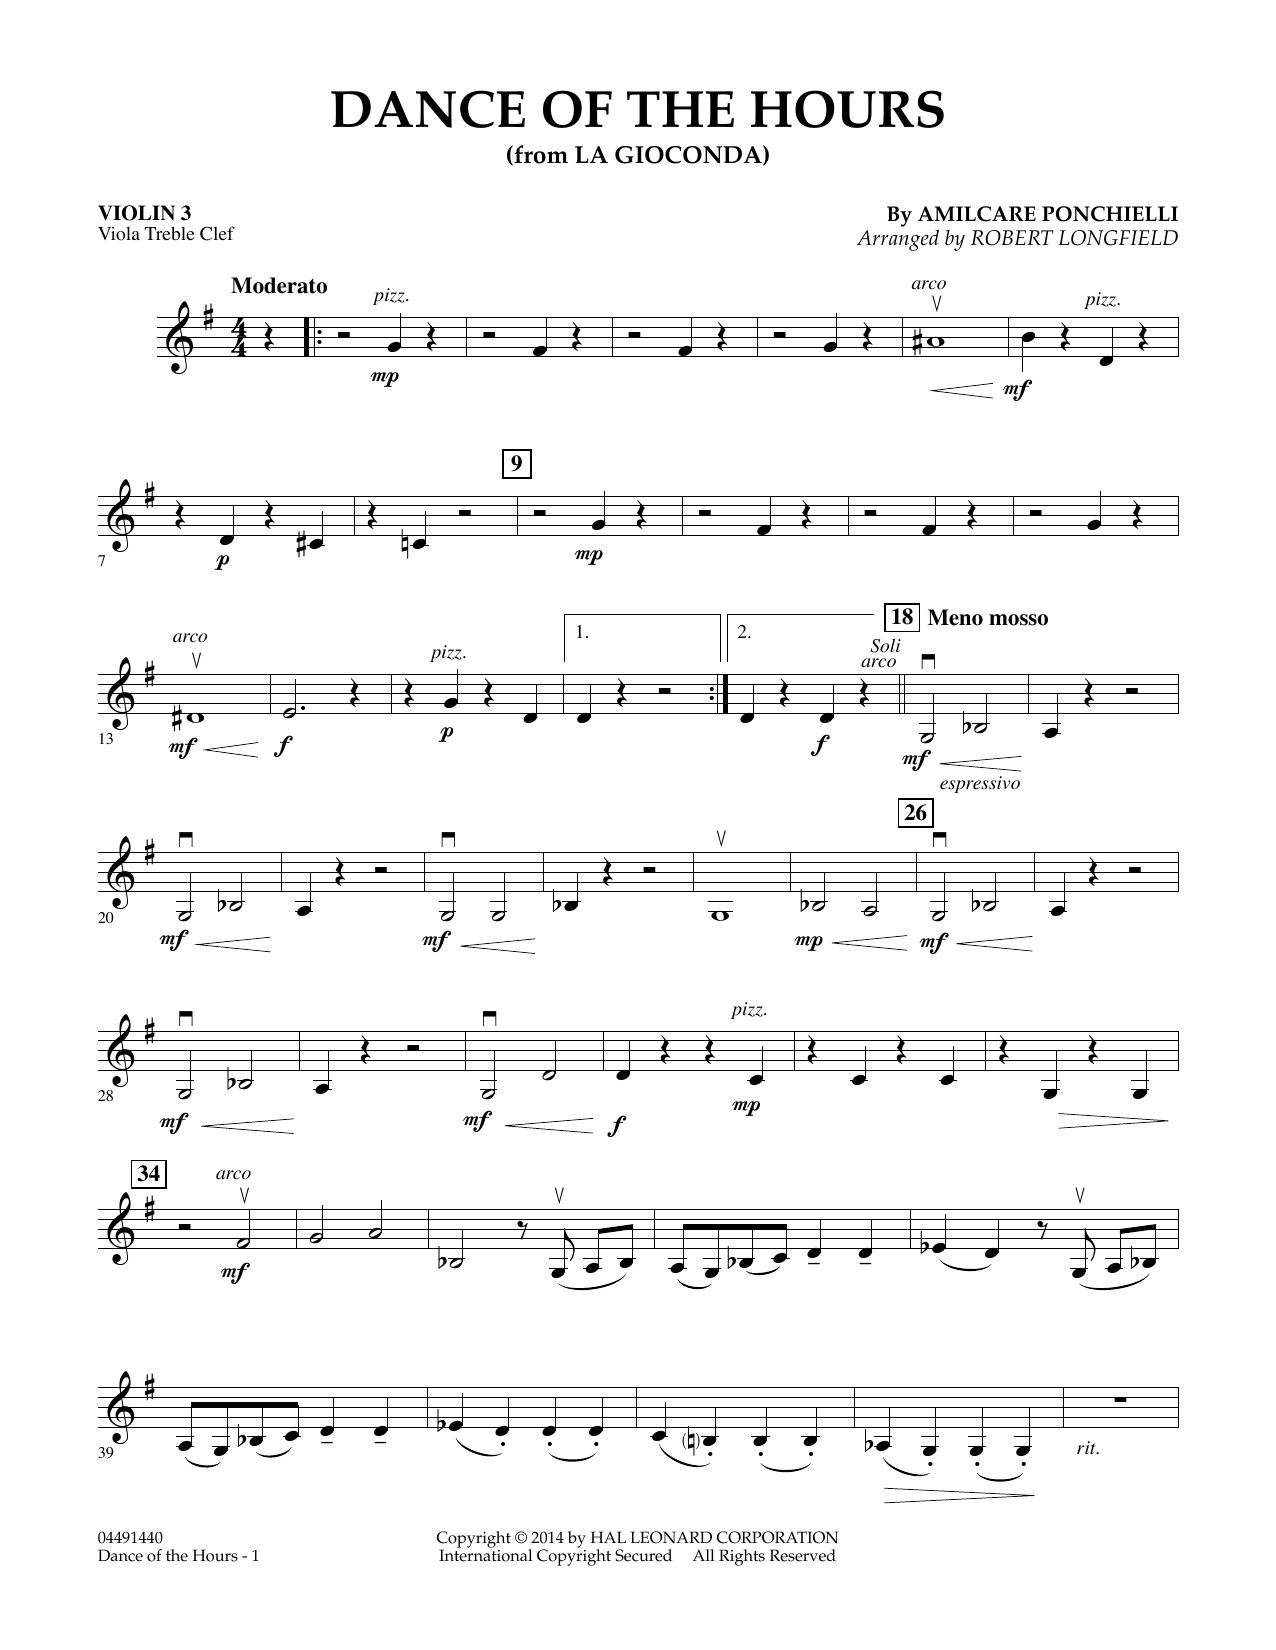 Download Amilcare Ponchielli Dance of the Hours (arr. Robert Longfield) - Violin 3 (Viola Treble Clef) sheet music and printable PDF score & Classical music notes